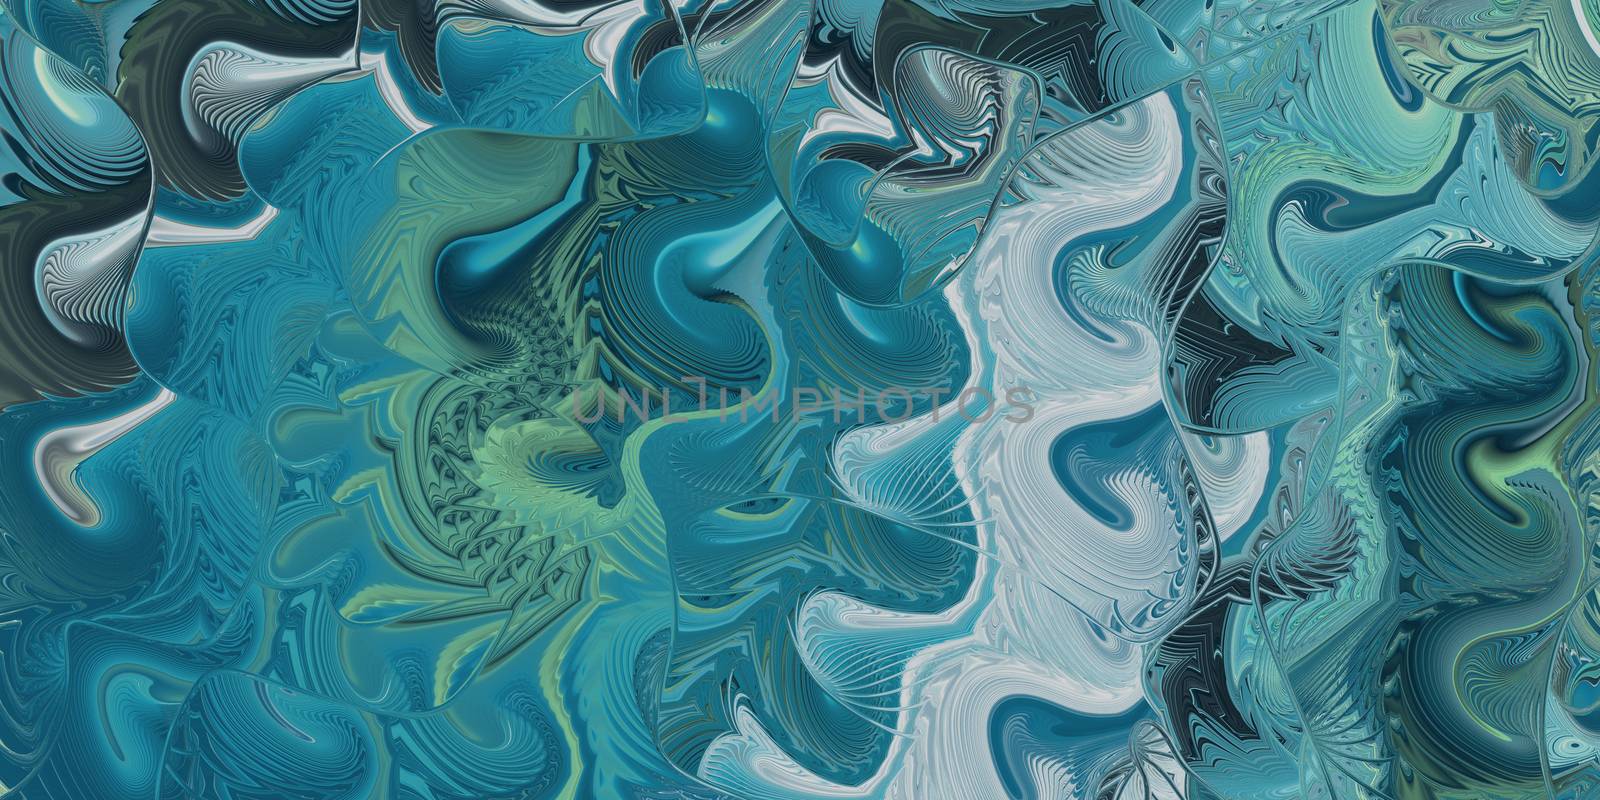 Blue Sea Swirls Background. Abstract Ocean Marbling Curves Texture. Nautical Spiral Shell Infinity Backdrop.